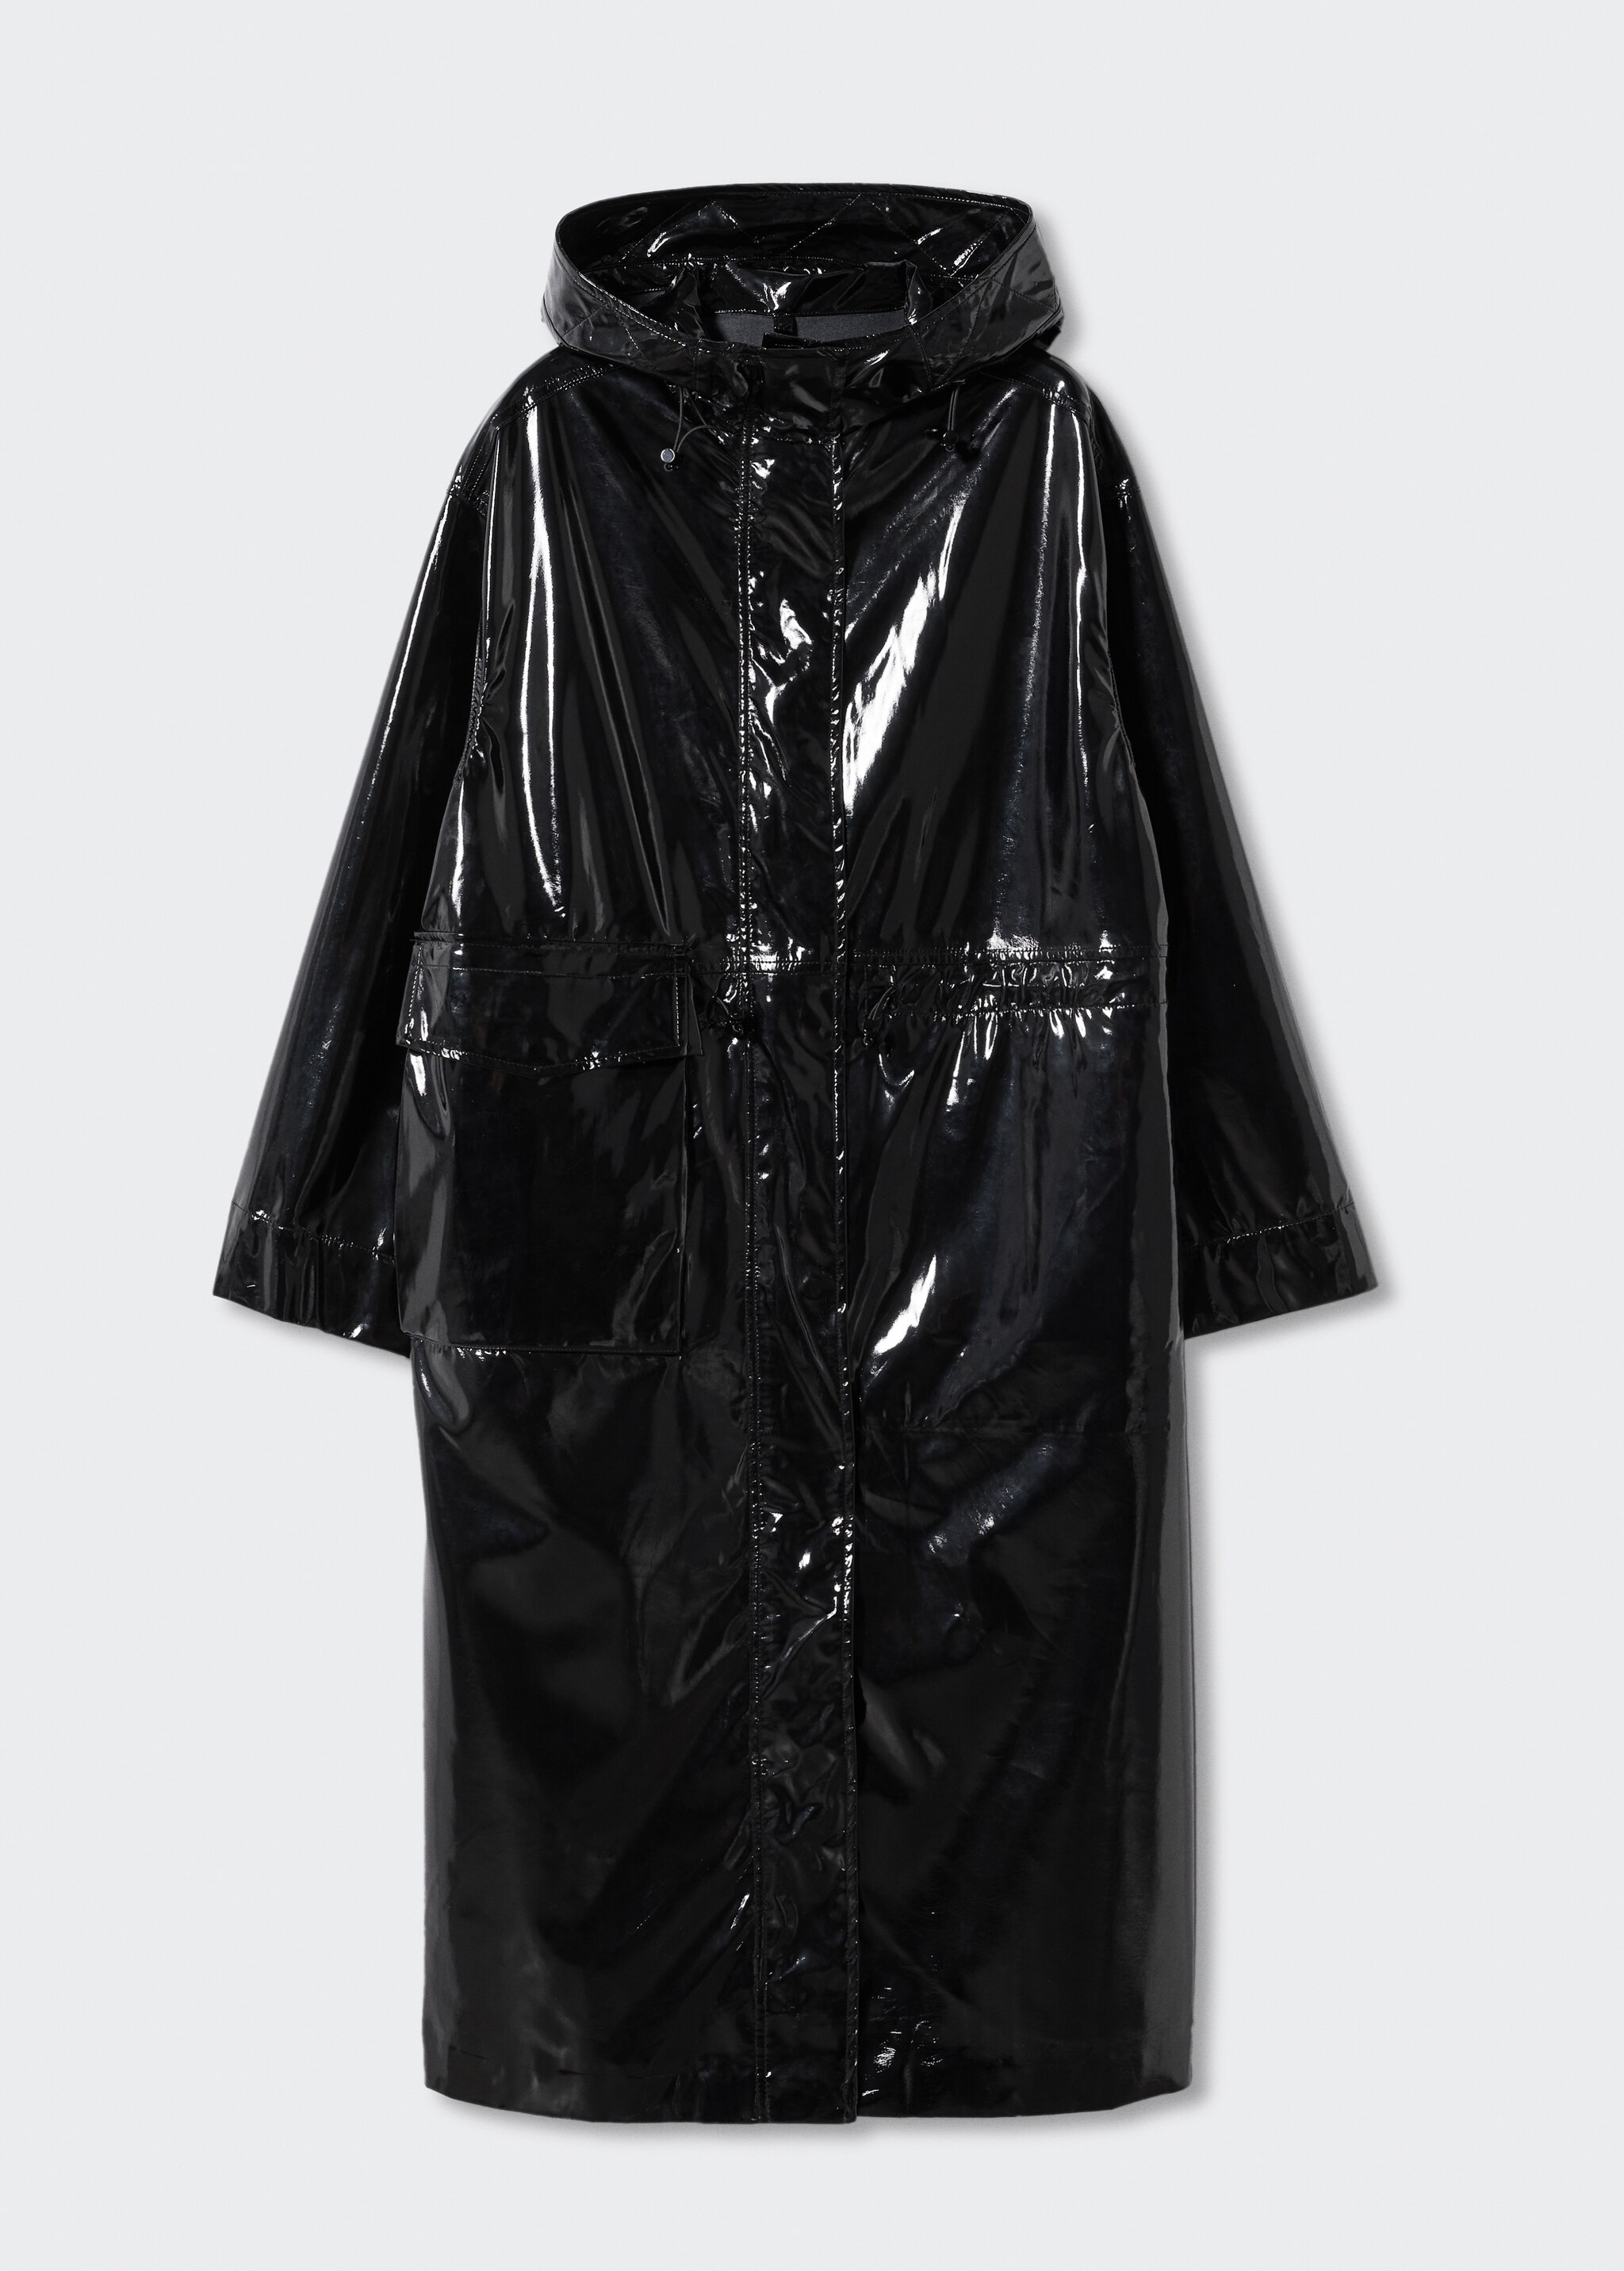 Patent leather hooded parka - Article without model